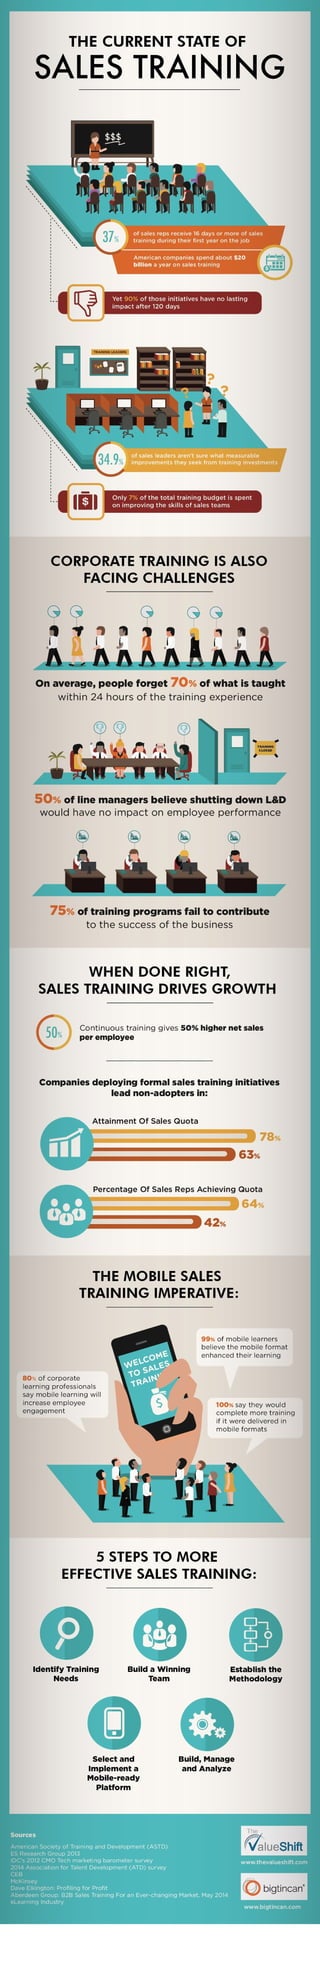 Sales training challenges infographic